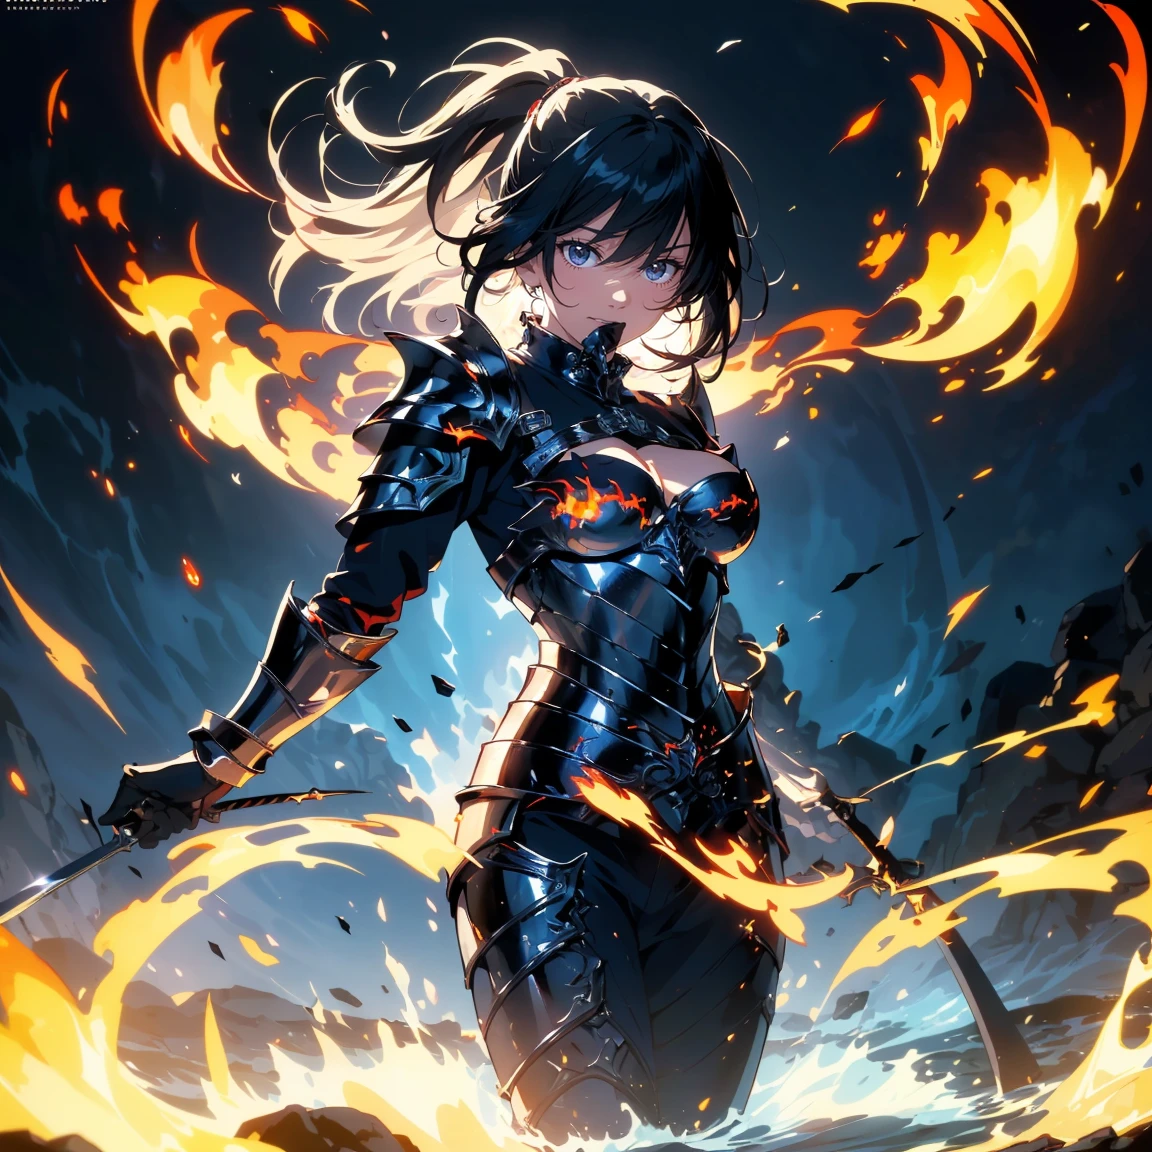 highest quality, Super detailed, (ultra high resolution,8K), Ultra-high definition 4K, (perfect anatomy, anatomically accurate), (One woman with big breasts has sexy charm), (Paladin), (Beautiful armor of flame that covers the whole body:1.6), (sharp look), ((flaming sword)), (surrounded by detailed flames:1.5), silver hair, (ponytail), (dynamic composition), high definition beauty face, (Beautiful blue eyes like sapphires), (open your mouth), photorealistic, shiny skin, (fine-textured skin,hair ), By the pond, water lily, moss, Crystal clear and clean water, (((midnight, dark))), (Decisive pose:1.3), (Hold detailed sword), fire,floating,flame,magic,glowing, shinkai makoto